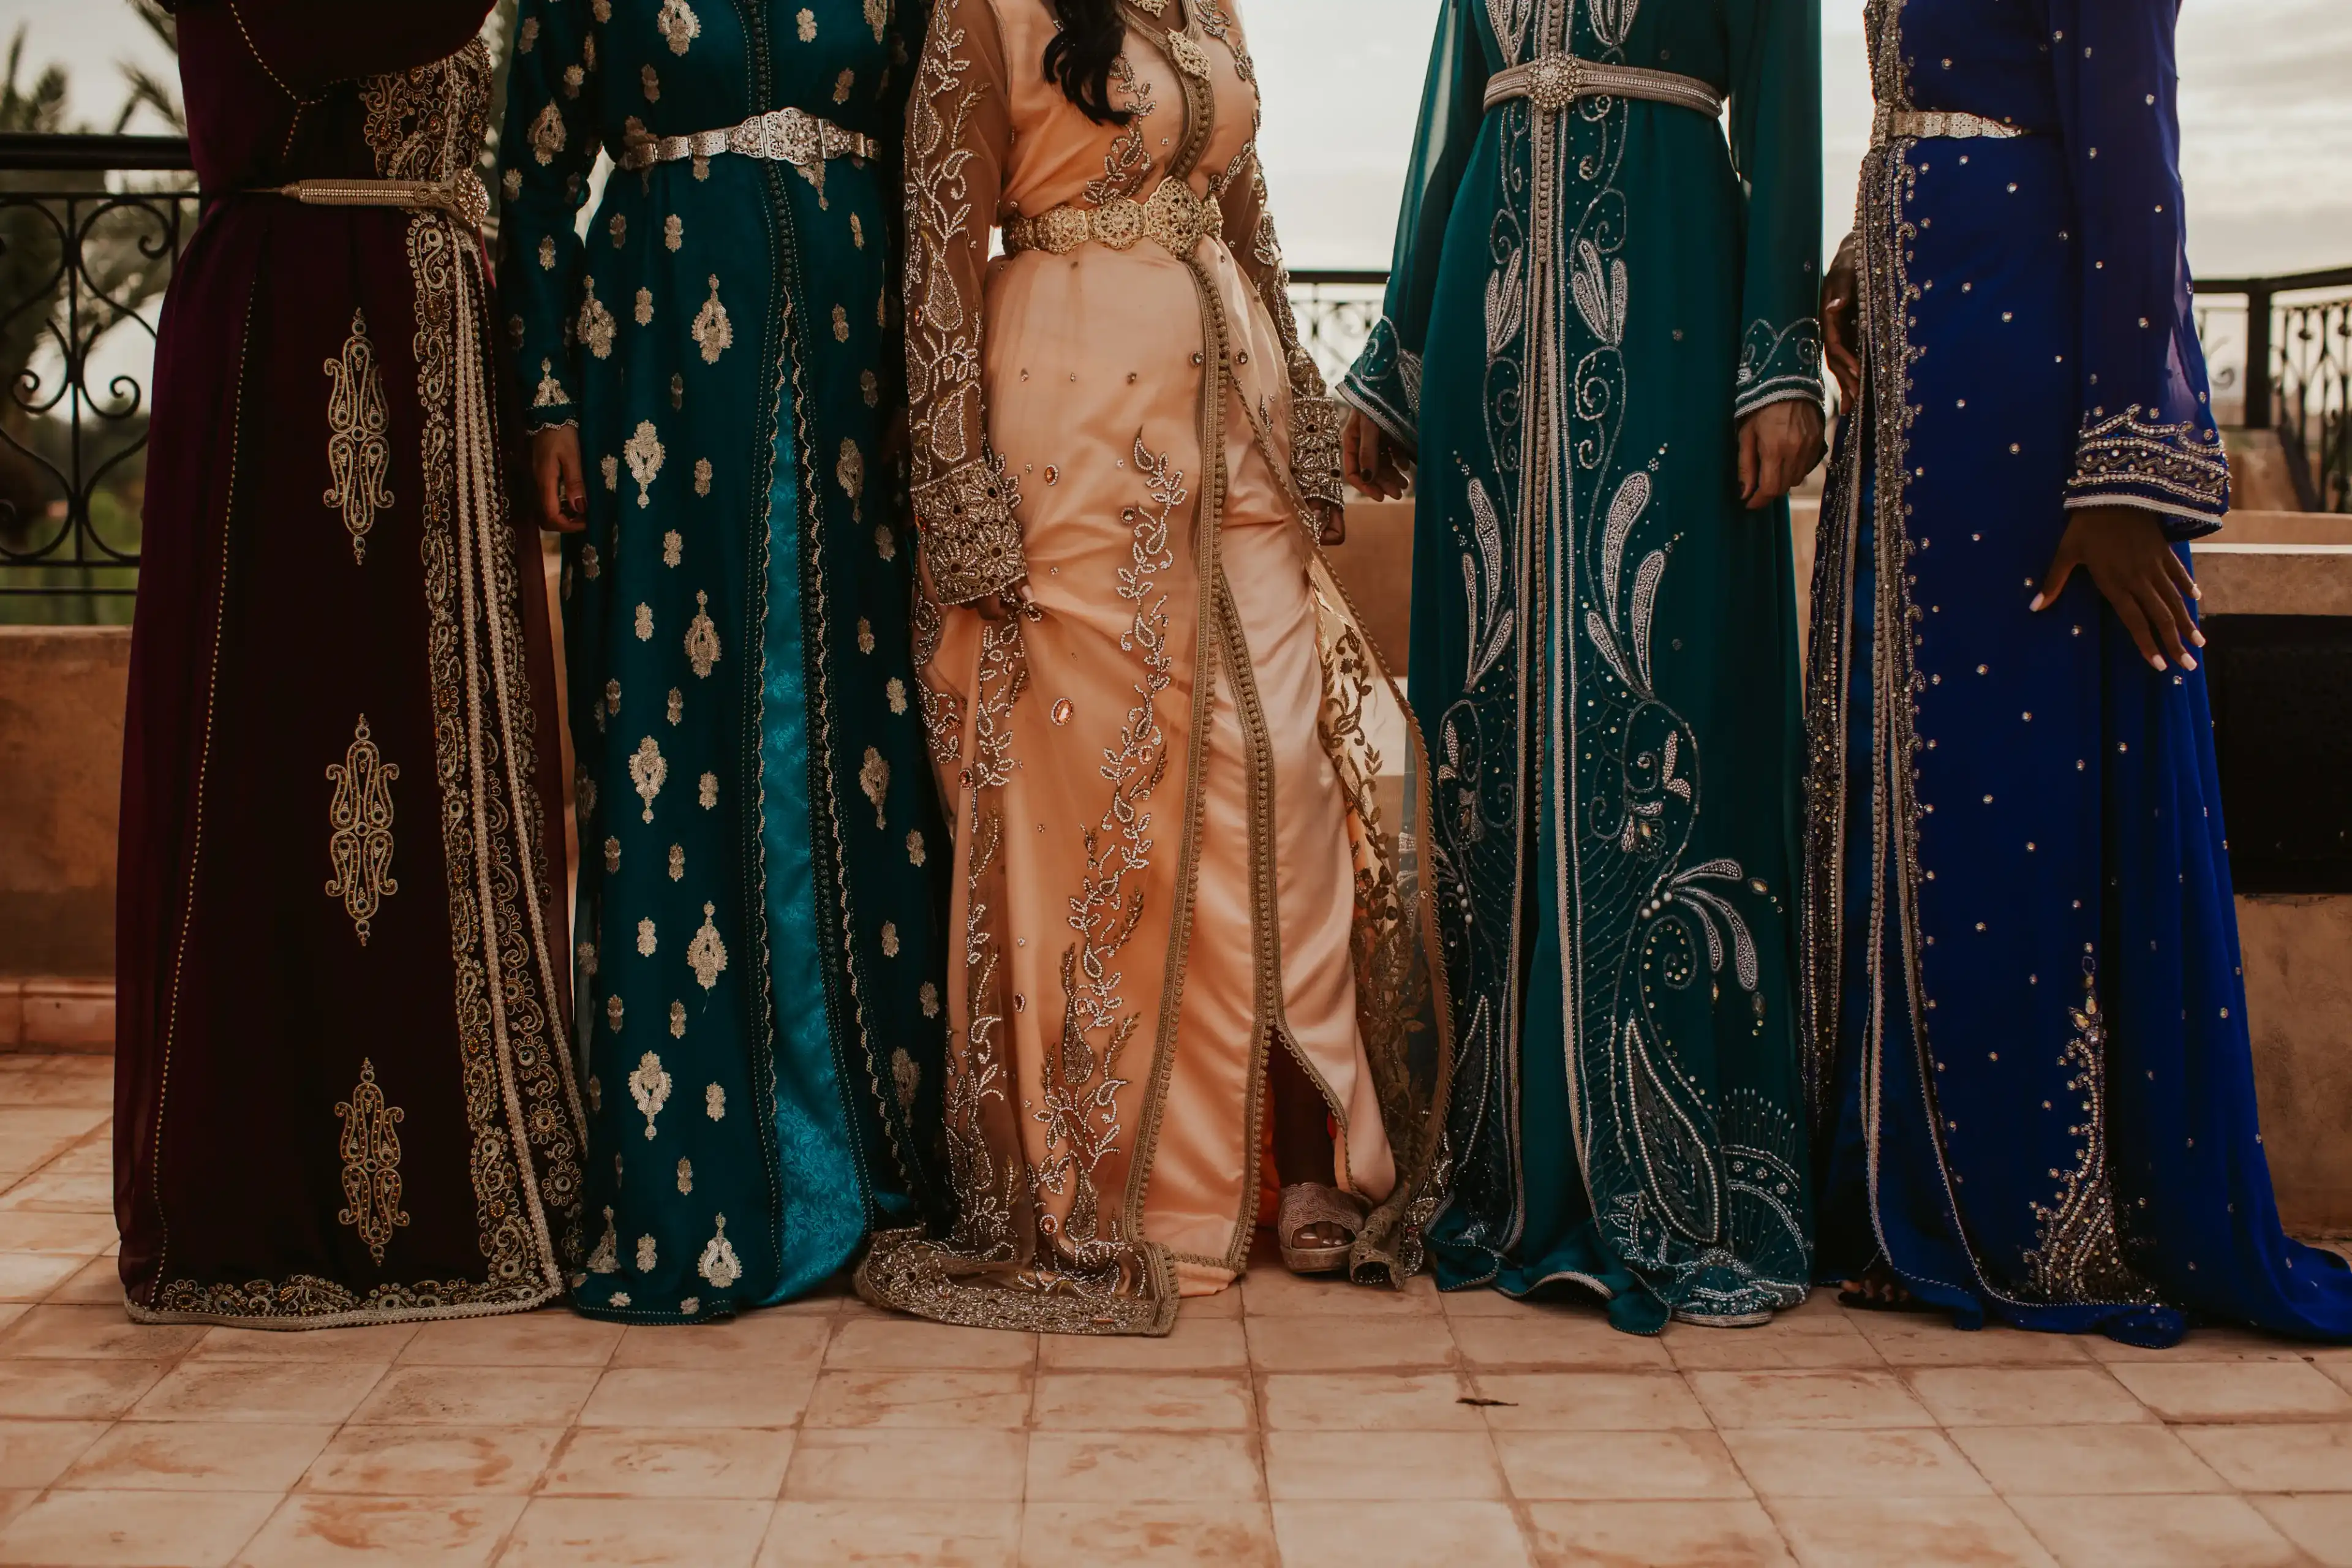 Bride and bridesmaids in traditional moroccan dresses